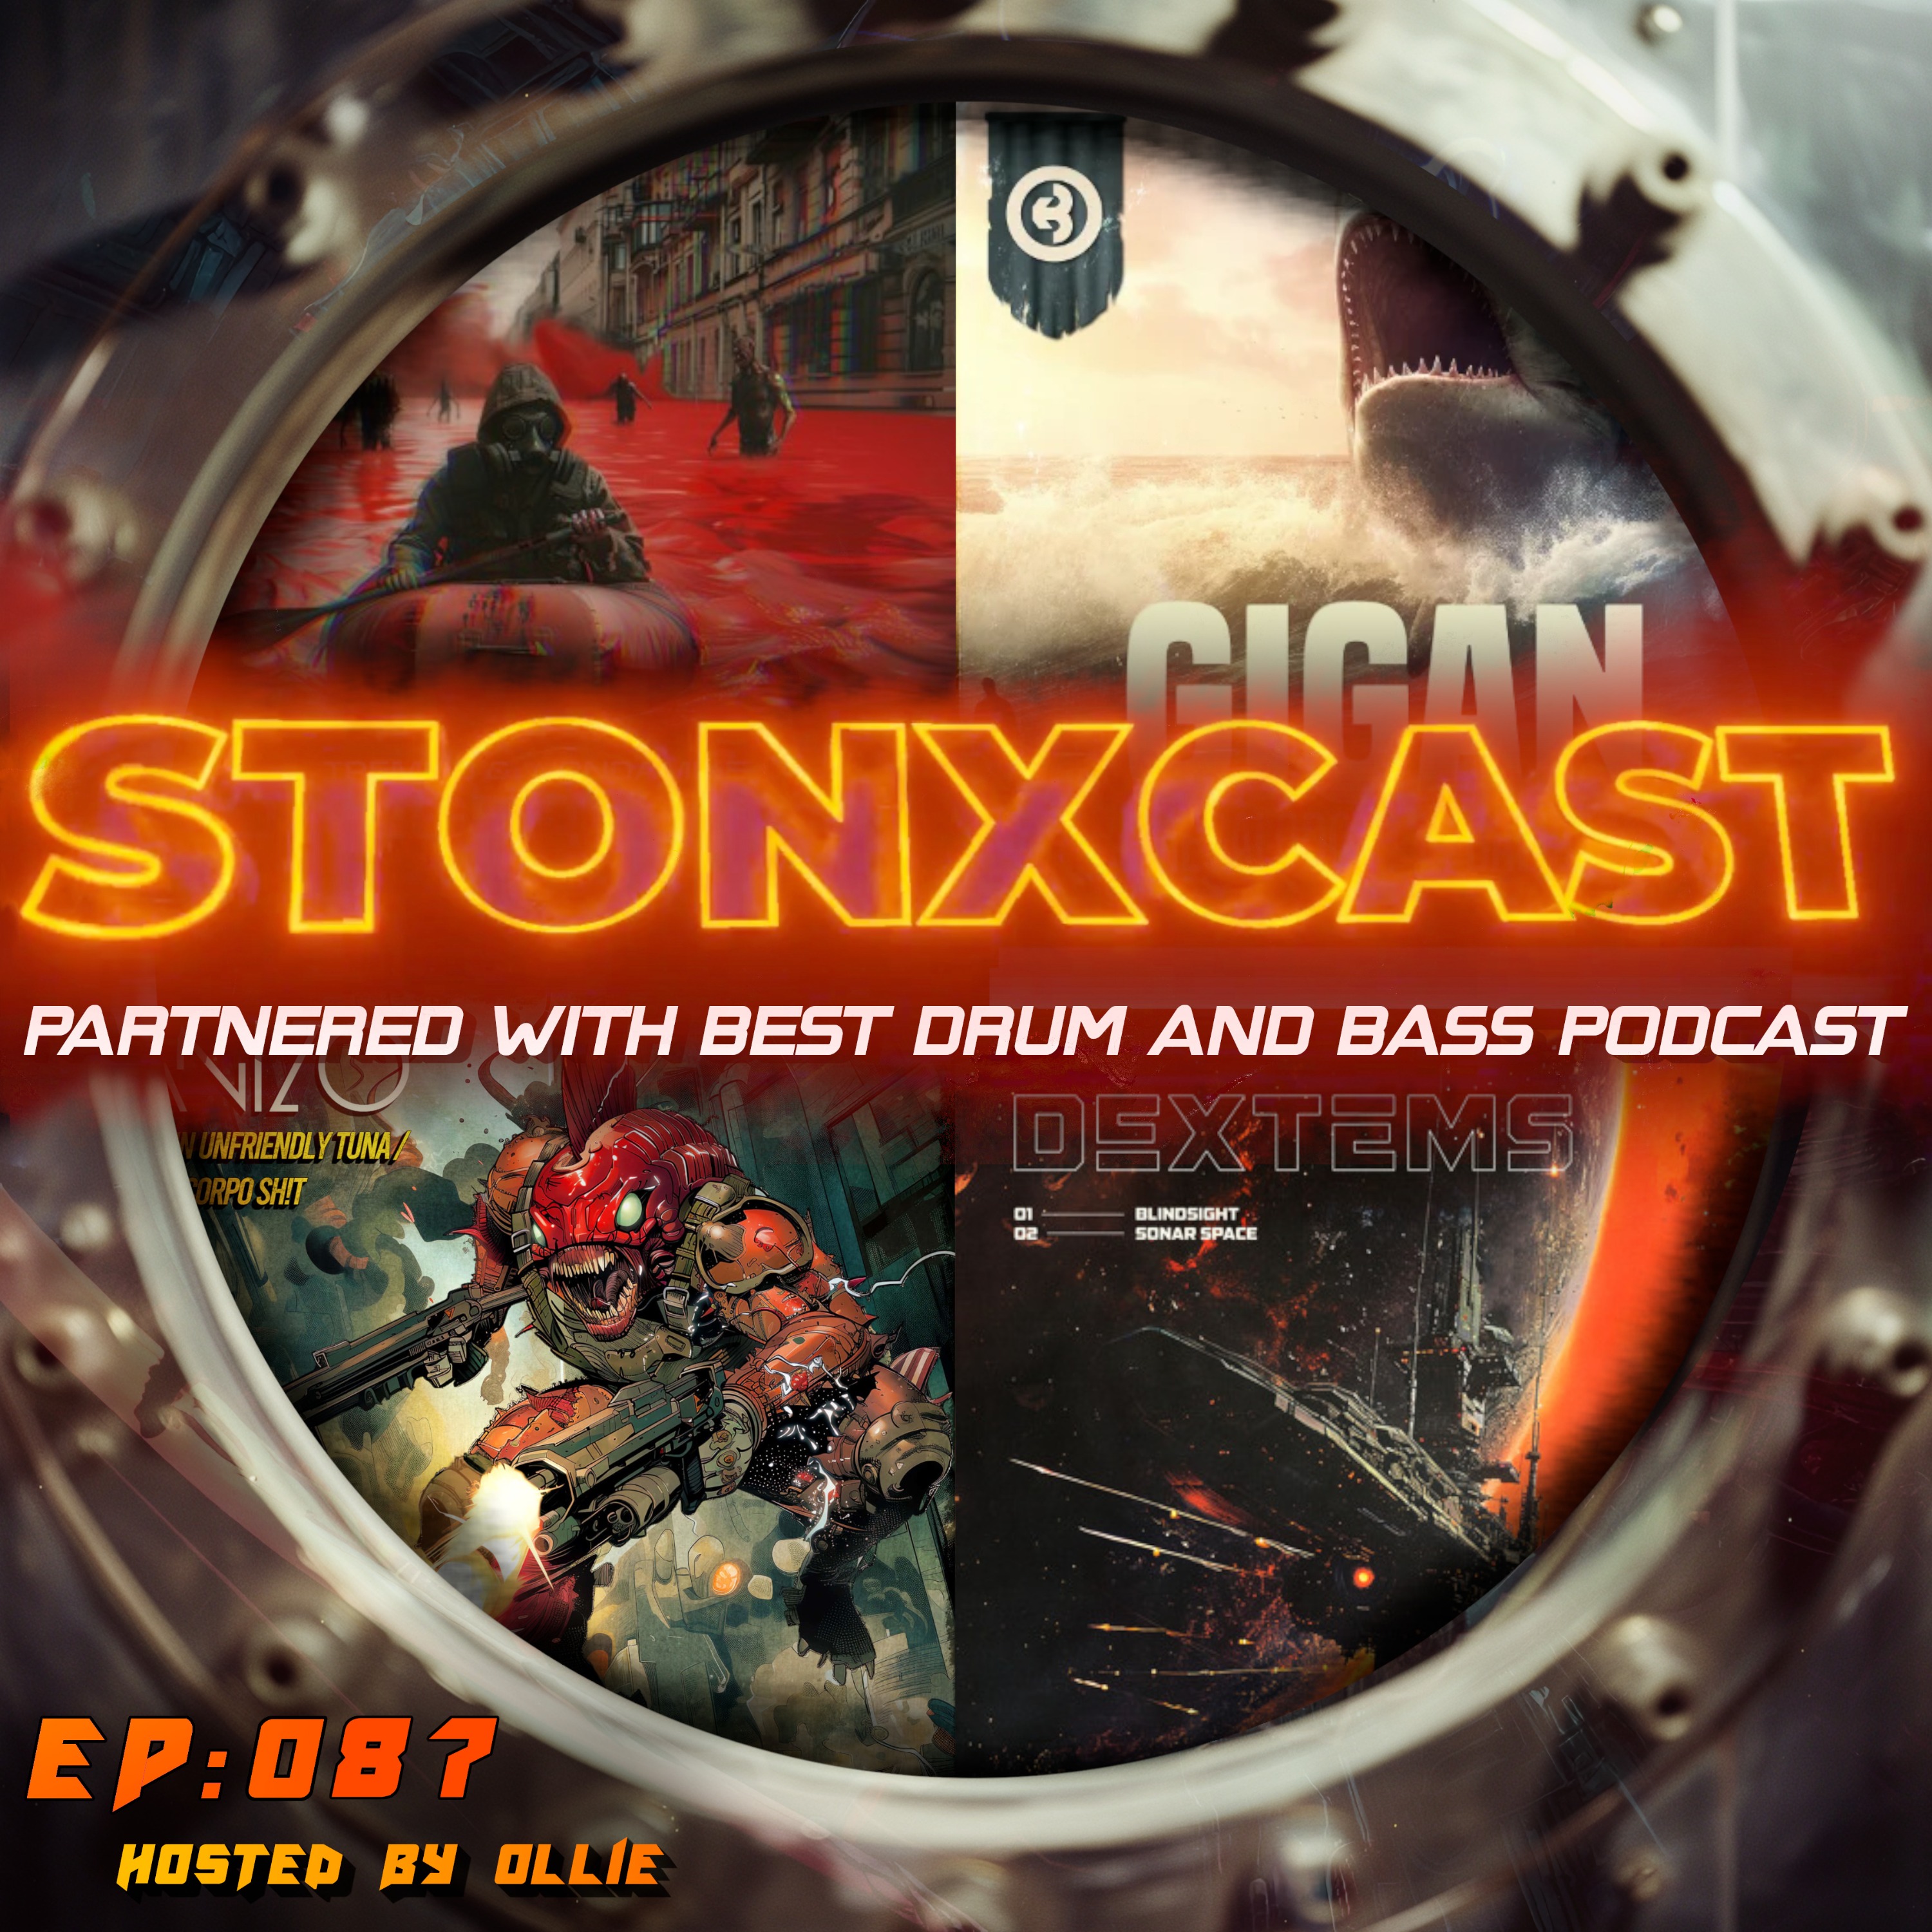 Stonxcast EP:087 - Hosted by Ollie cover art